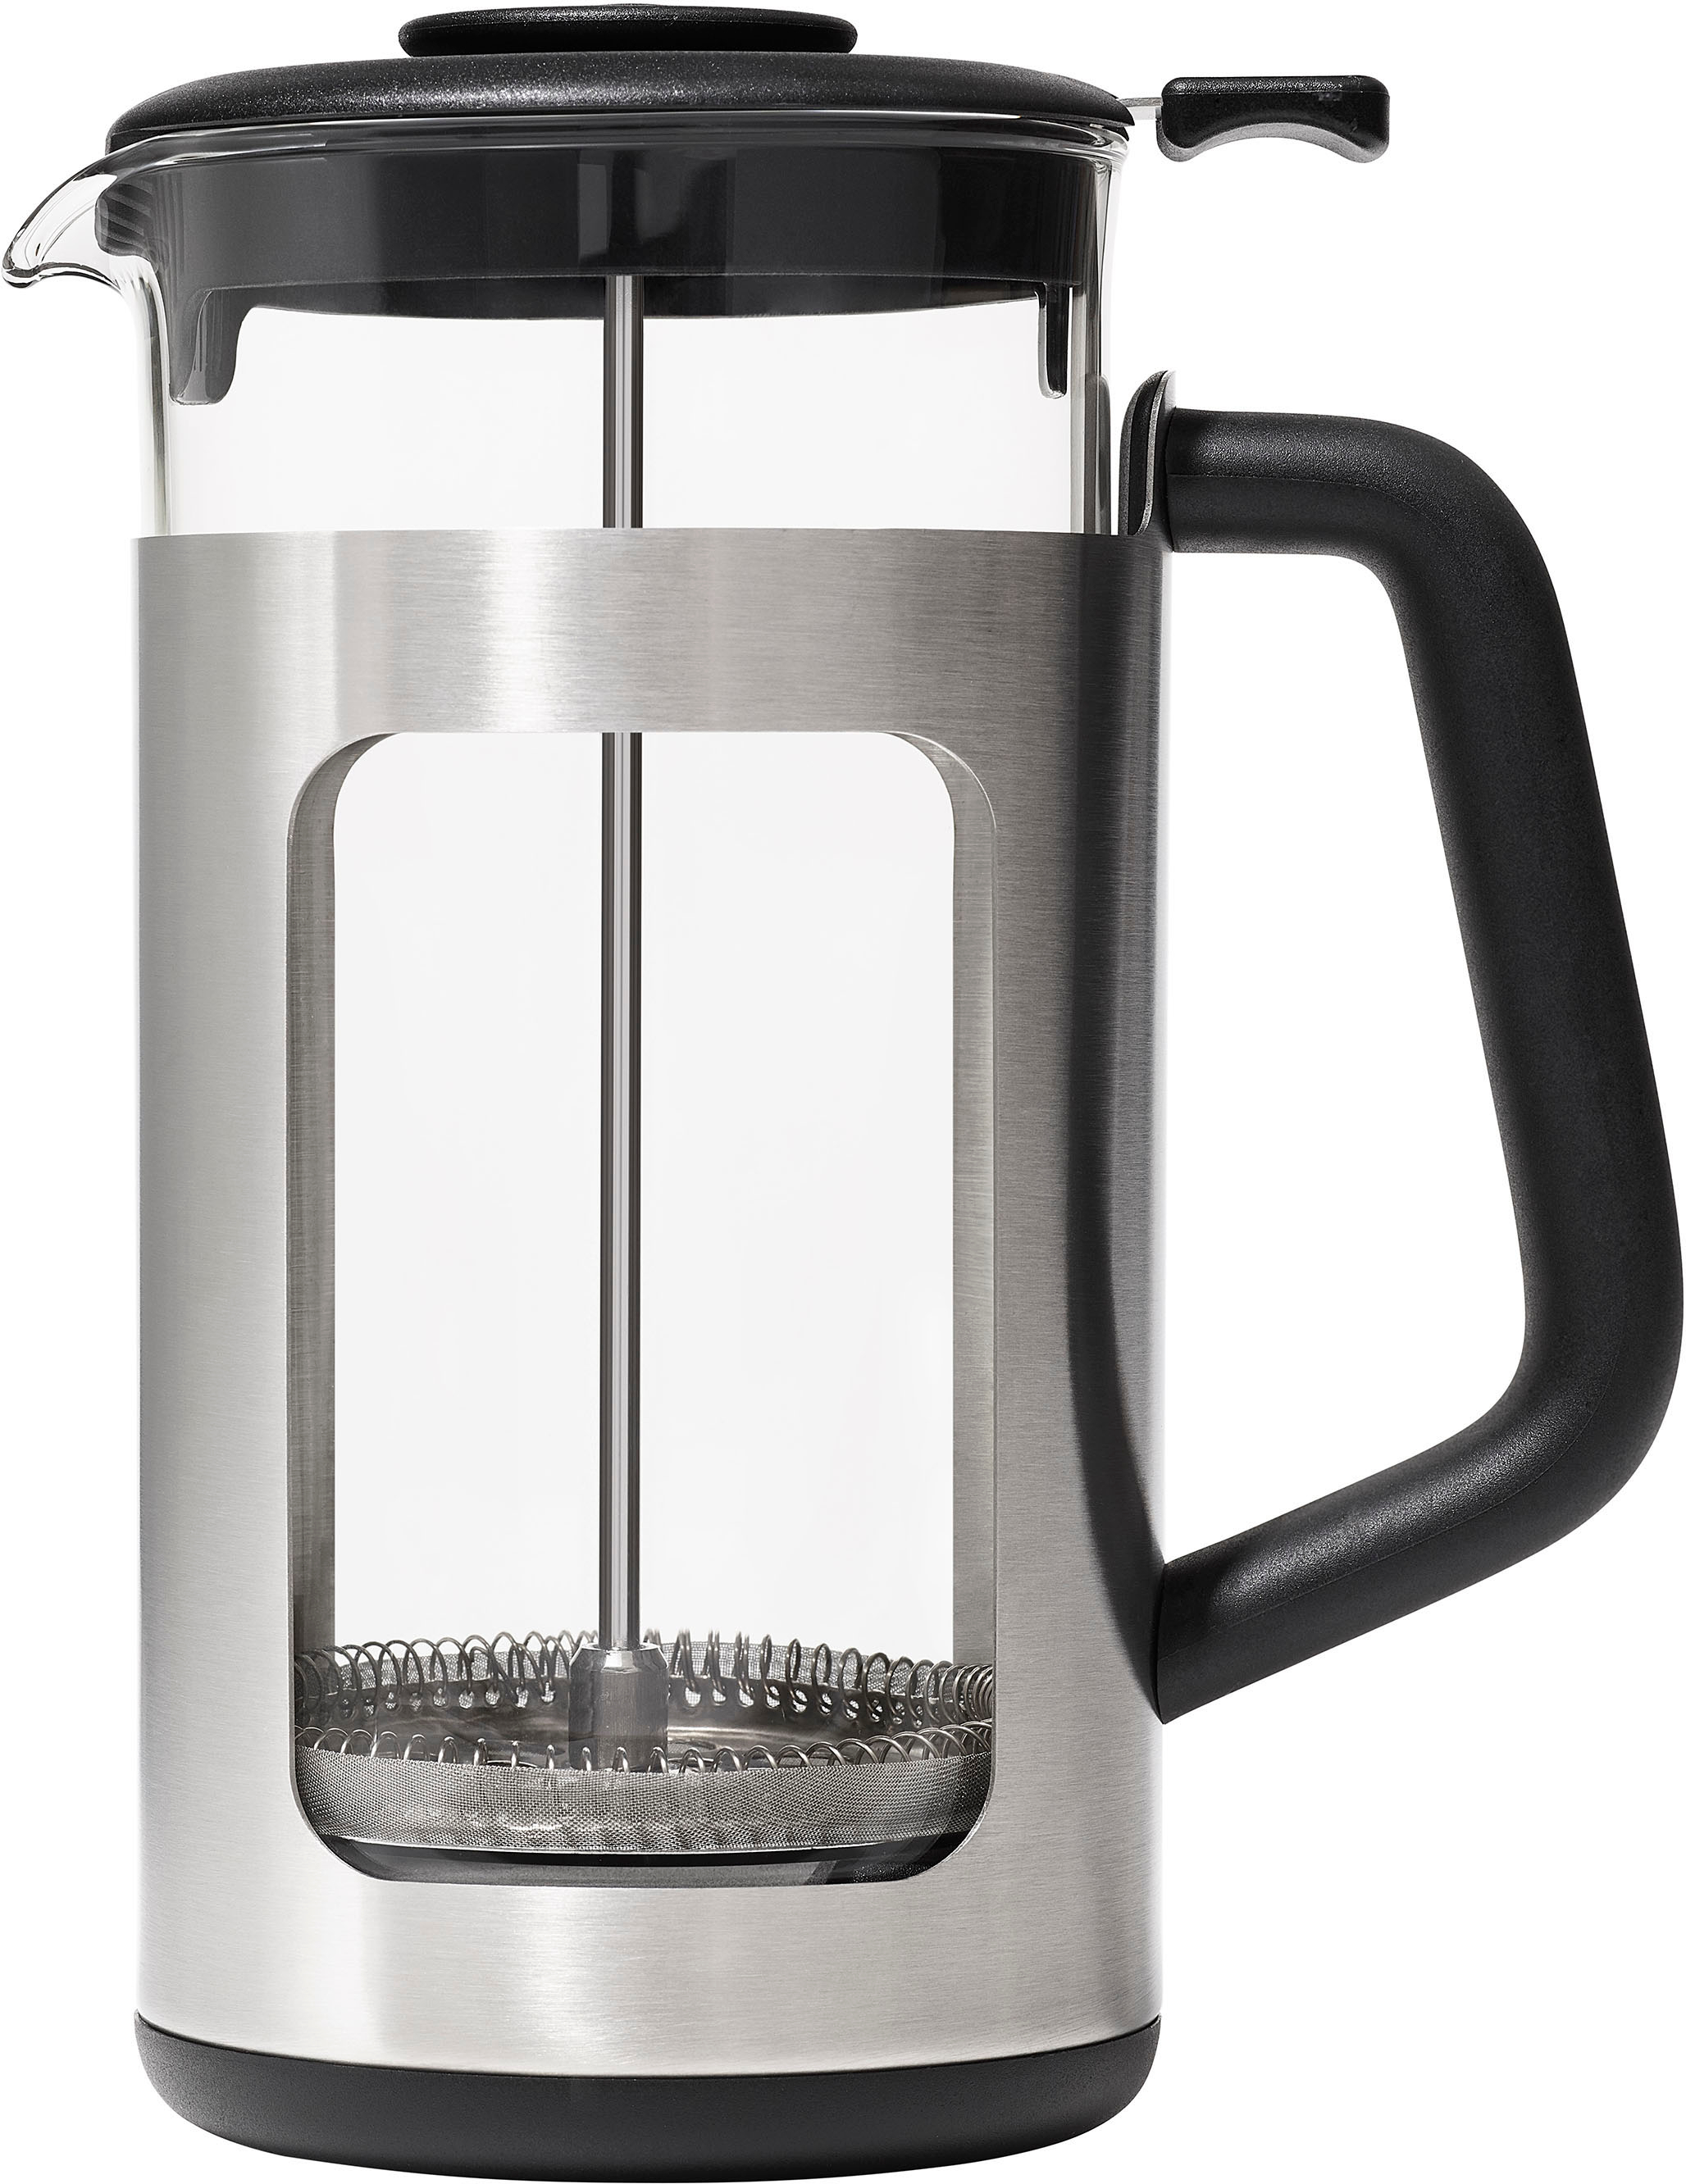 OXO Brew Replacement Carafe for 12-Cup Coffee Maker | Replacement Carafe for 12-Cup Coffee Maker from OXO